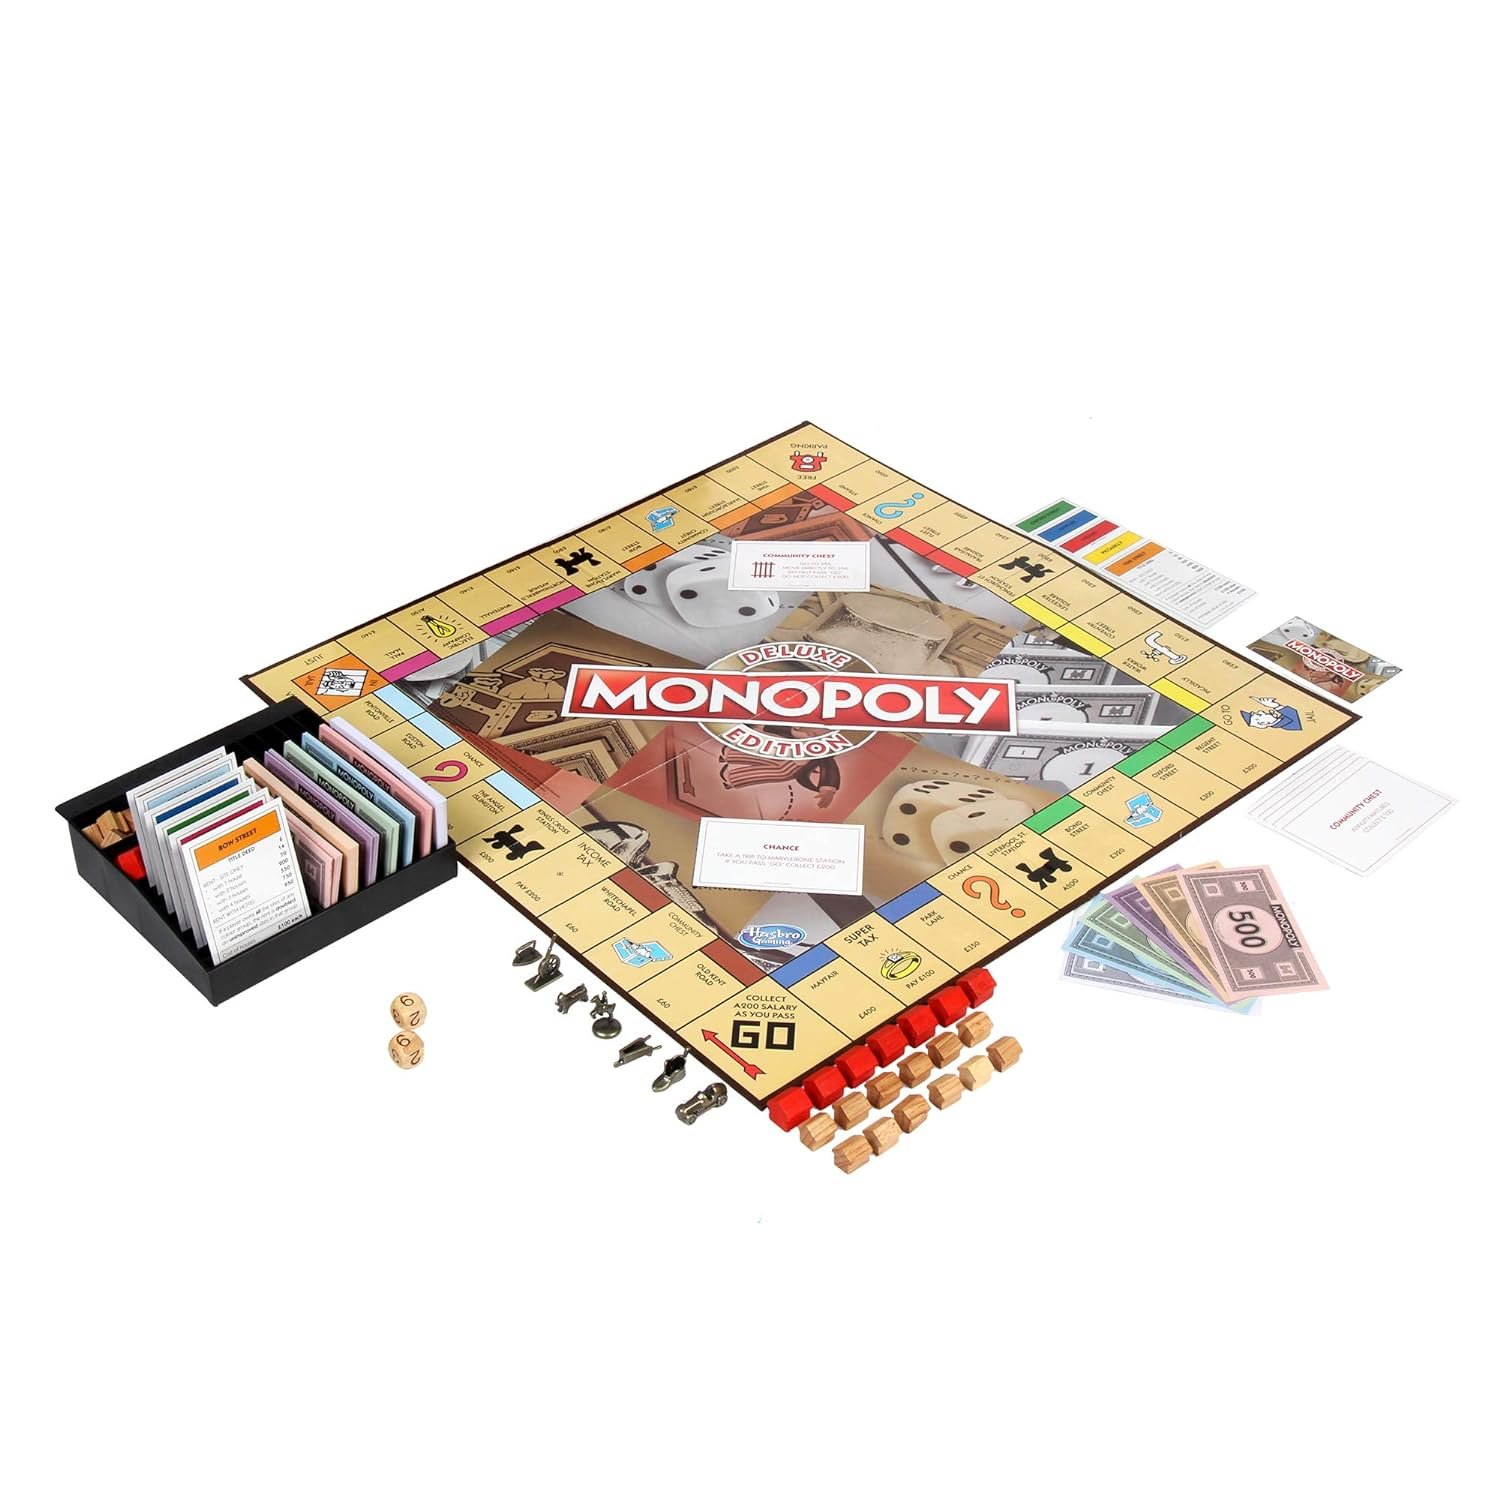 Monopoly Deluxe Edition Board Game image 2